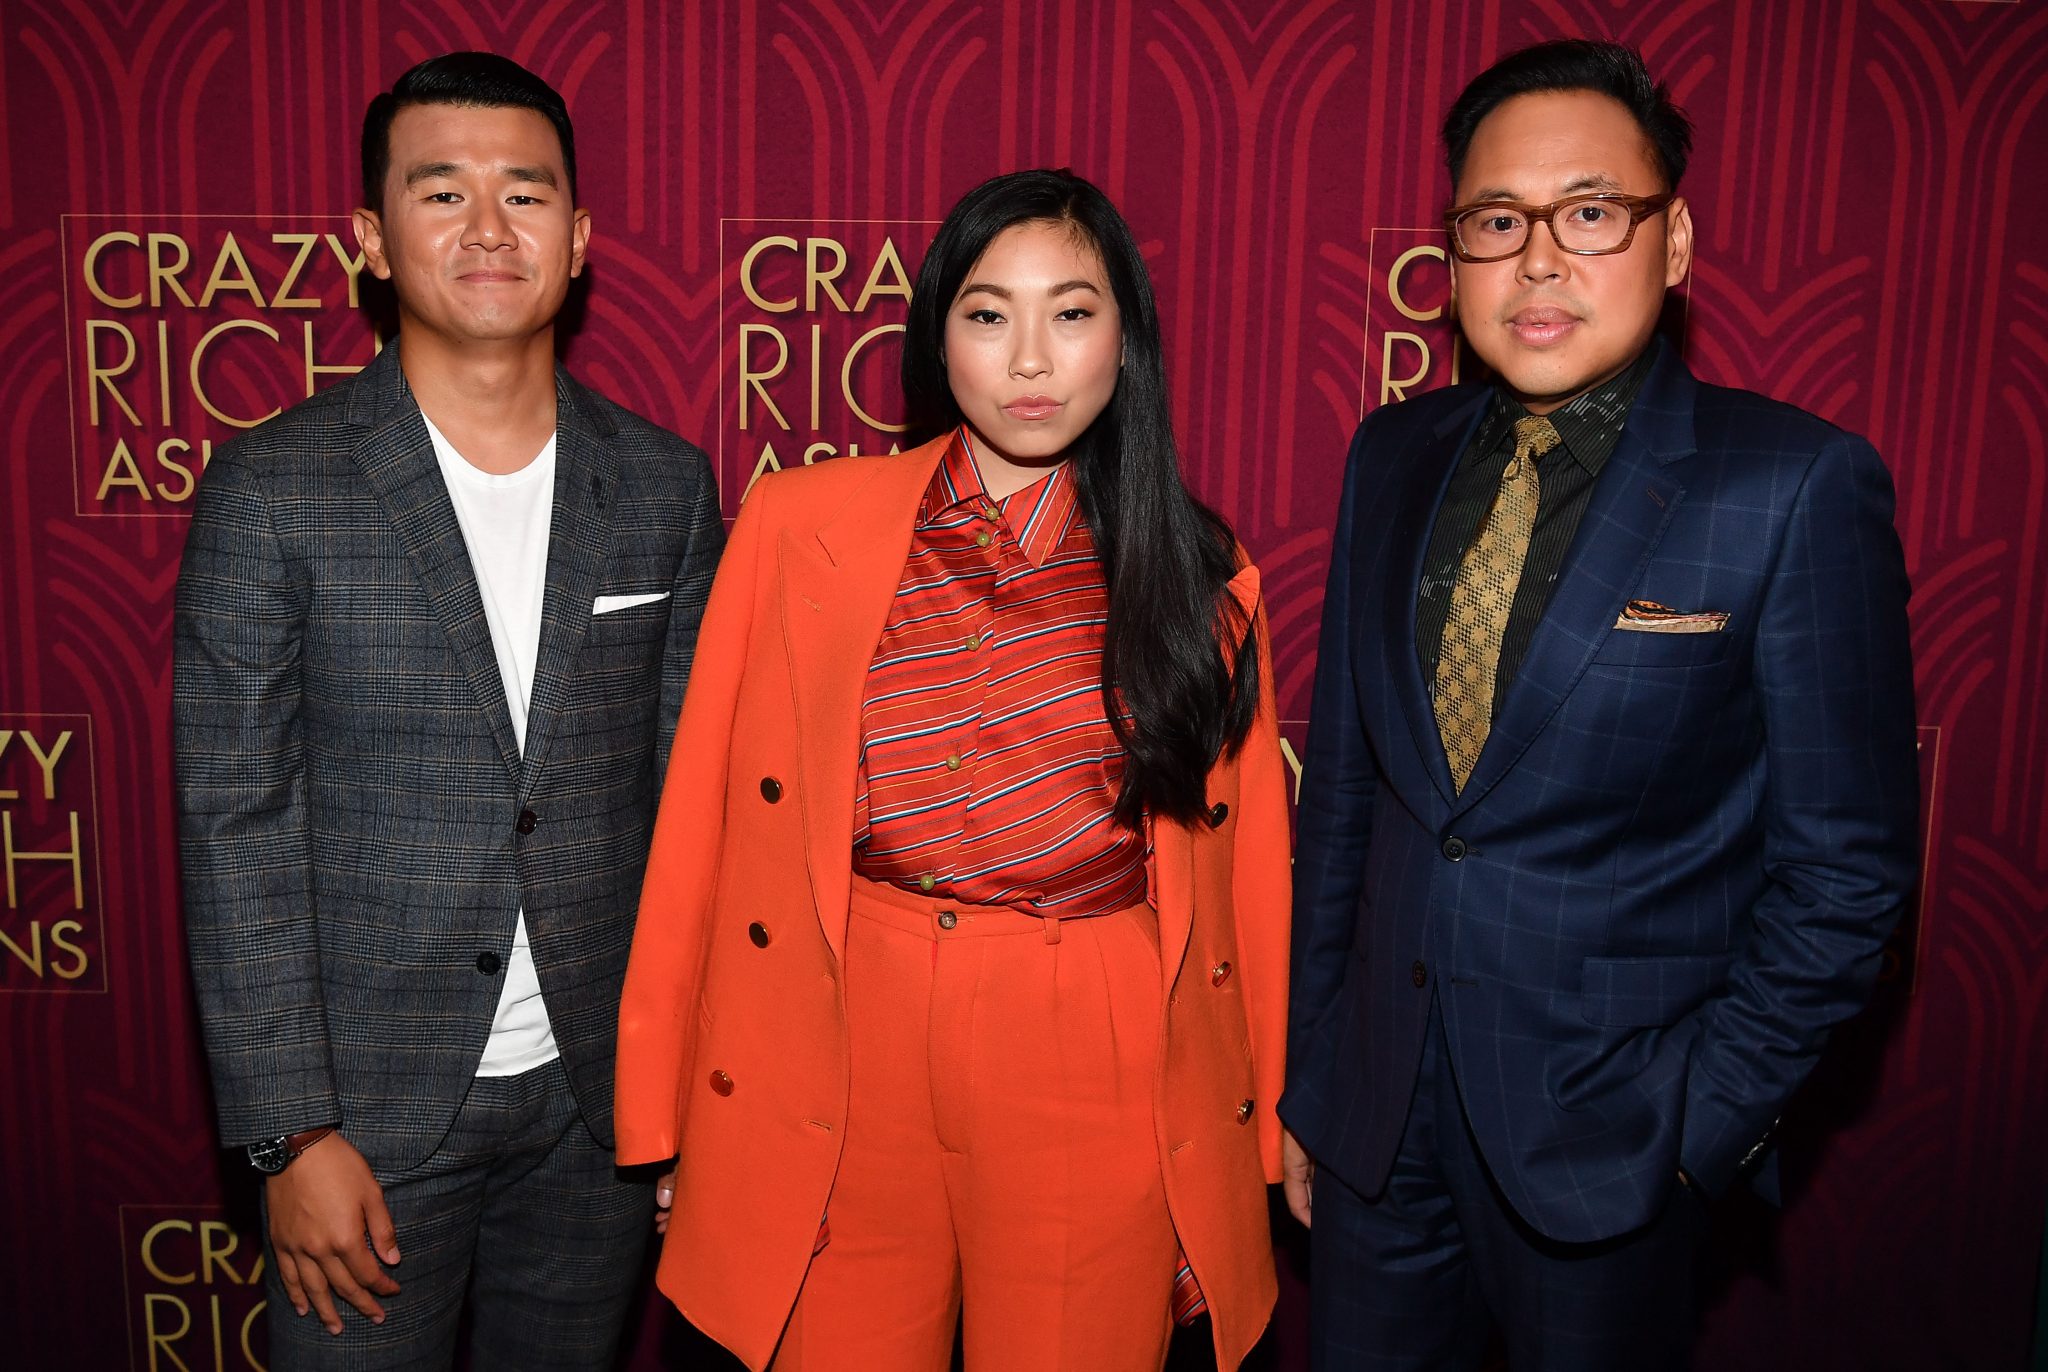 Crazy Rich Asians Private Red Carpet Screening And After Party In Atlanta